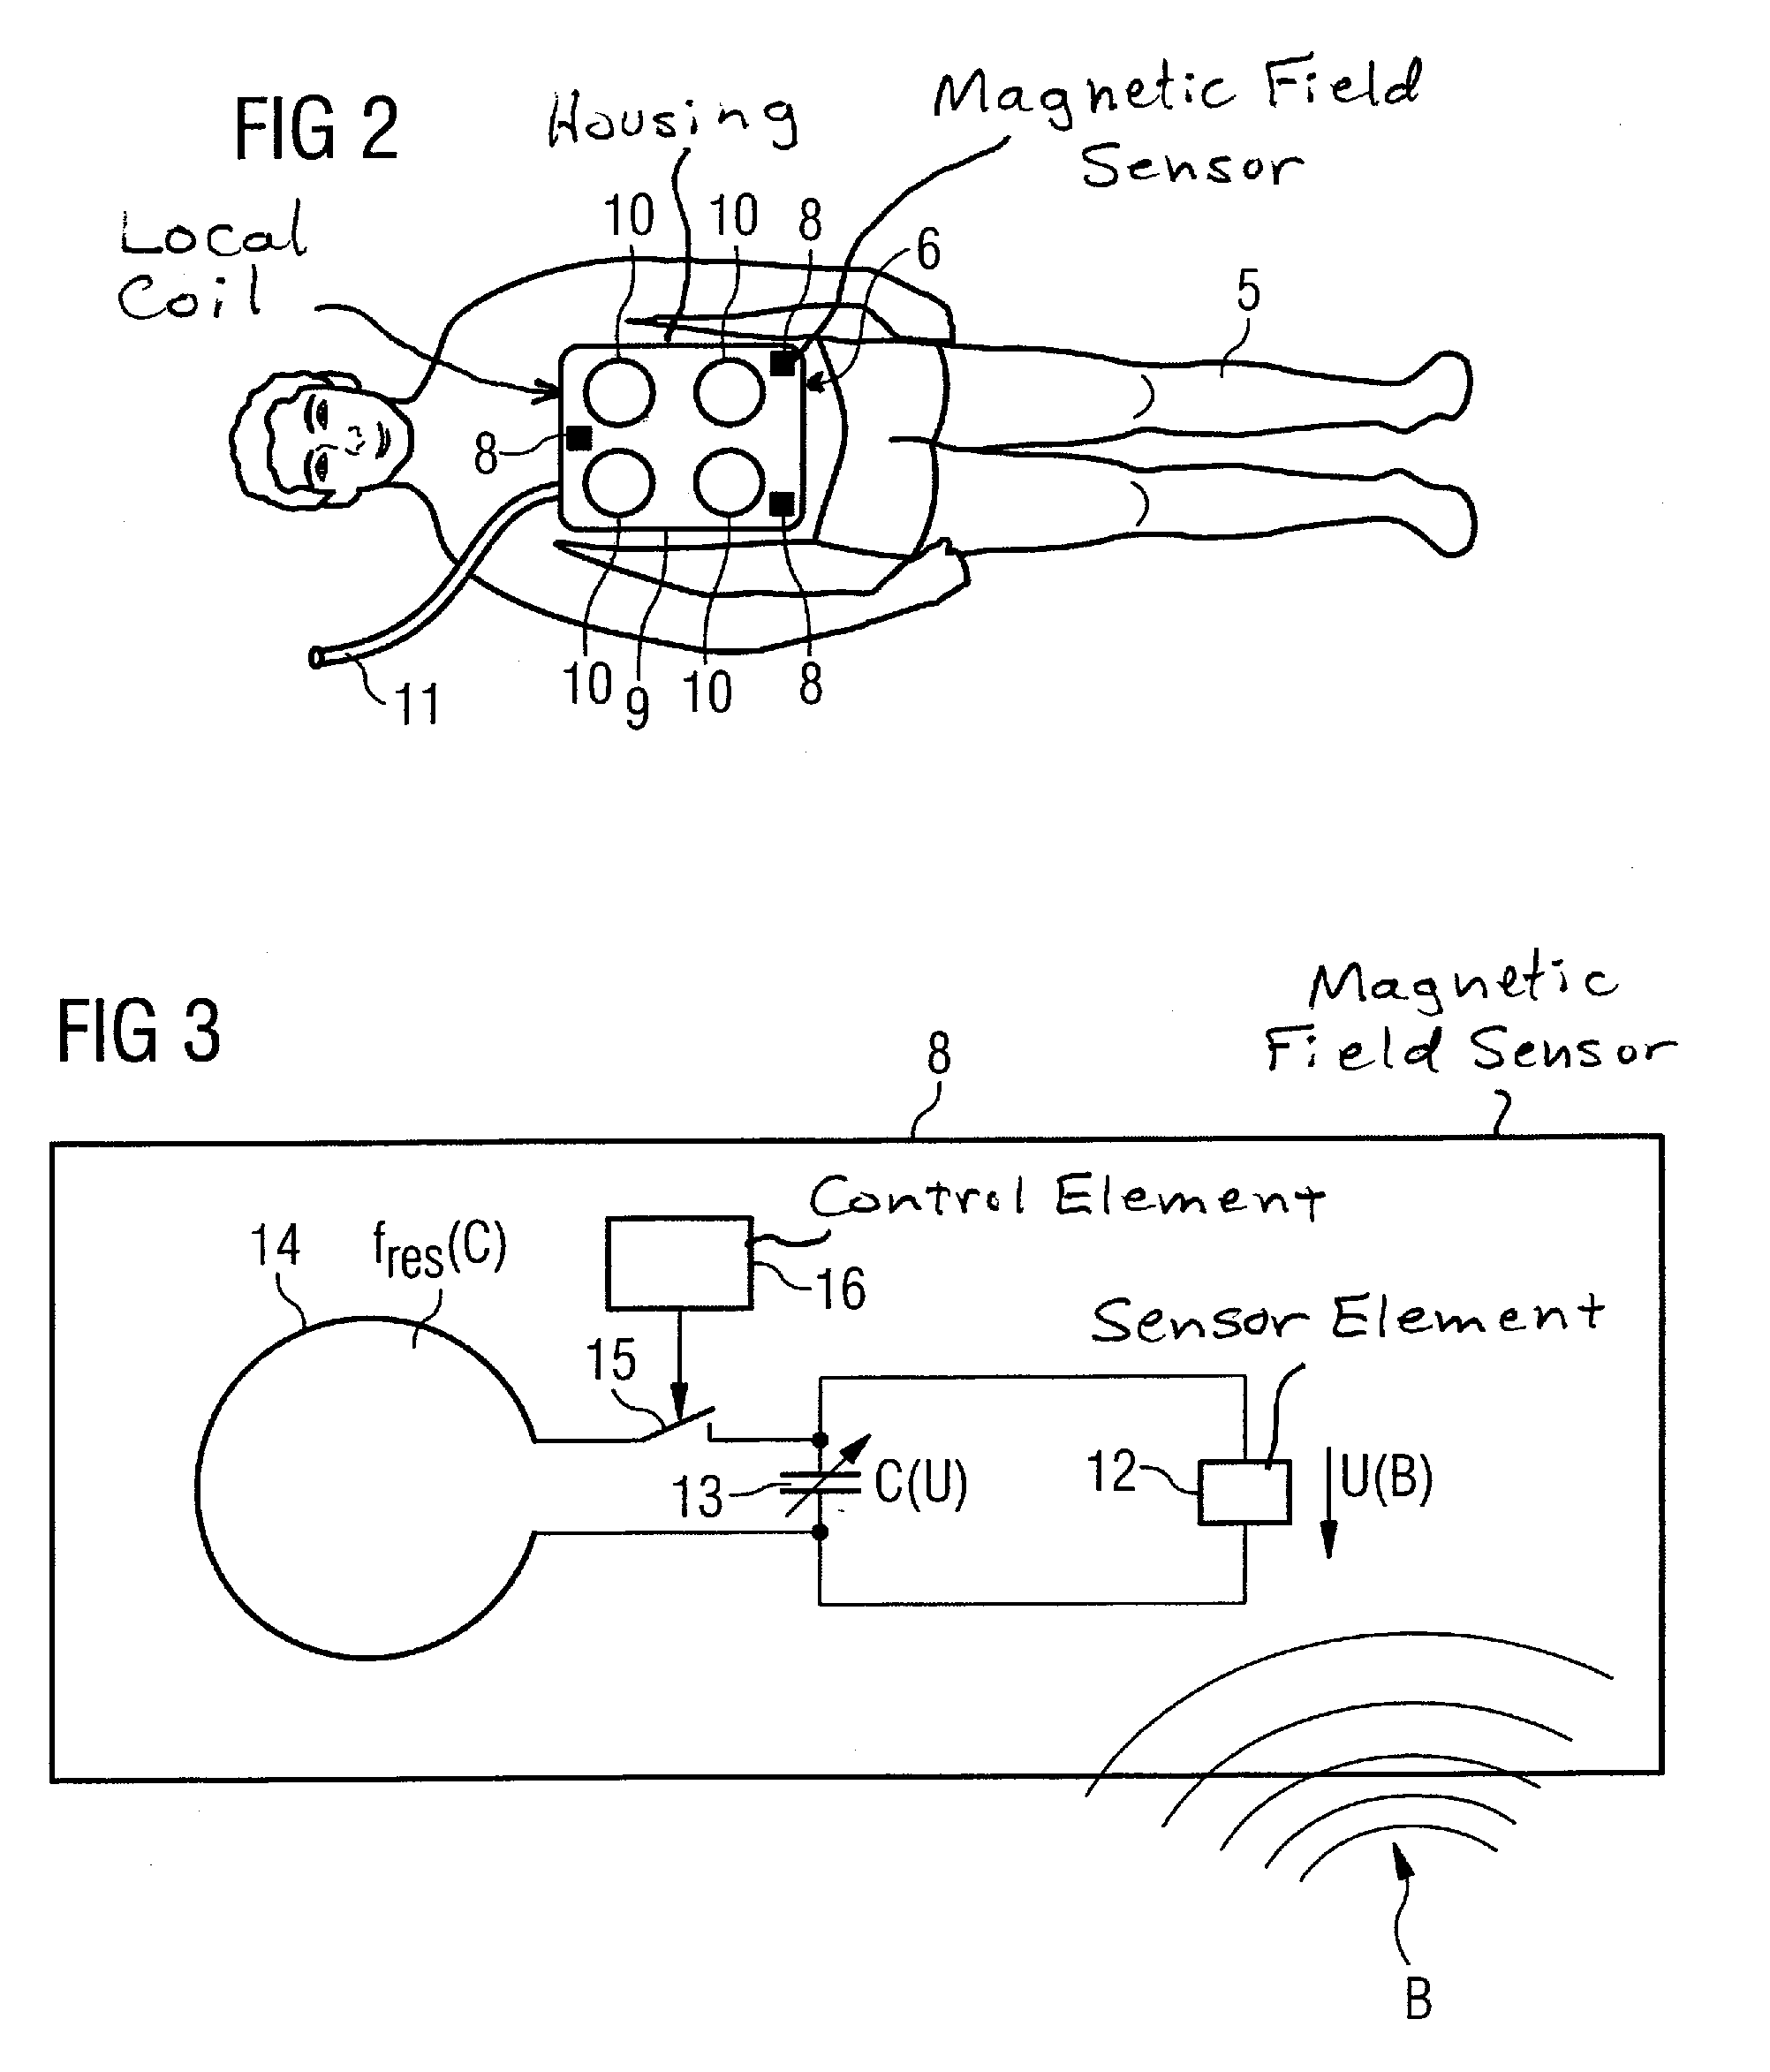 Magnetic resonance tomography device with localization system and method to localize a local coil